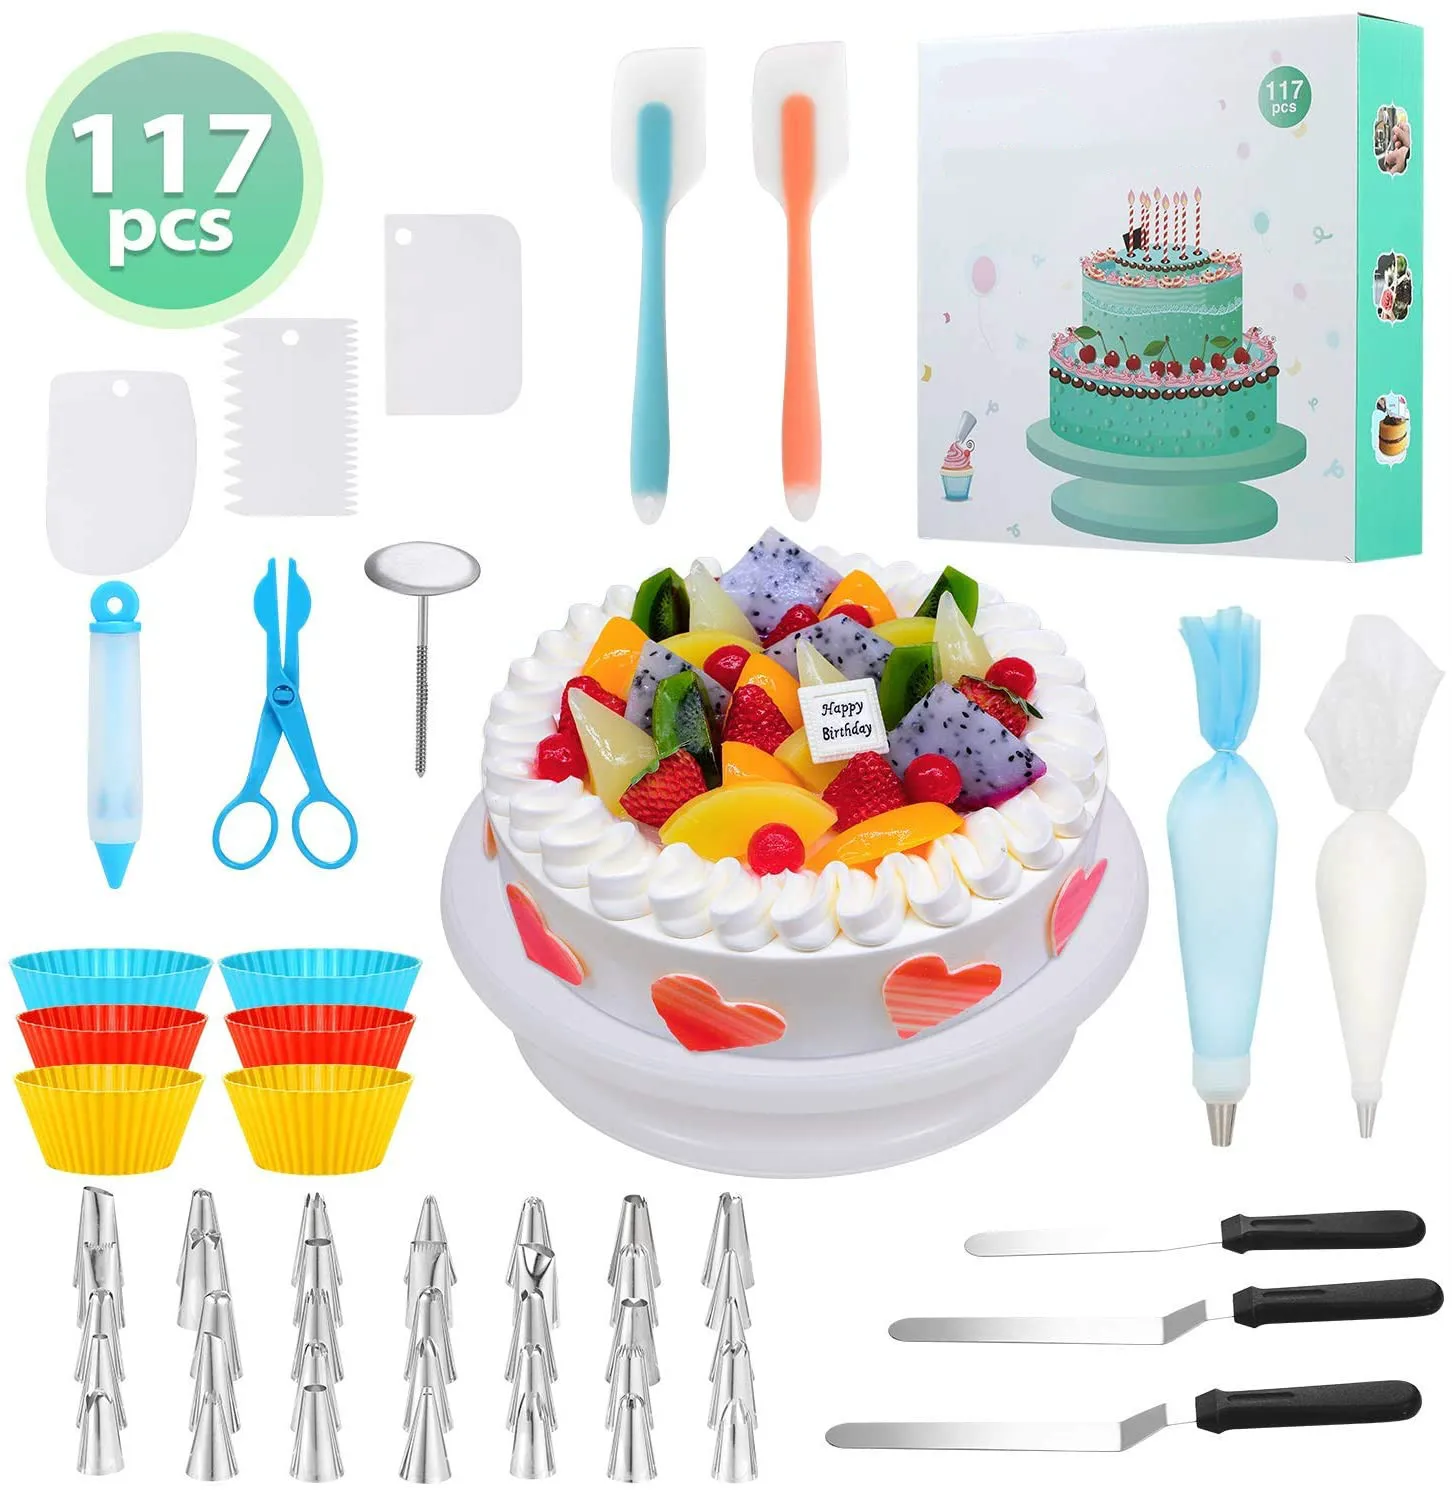 Hotterpower MCK Complete Cake Baking Set Bakery Tools for Beginner Adults Baking Sheets Bakeware Sets Baking Tools, Multicolor